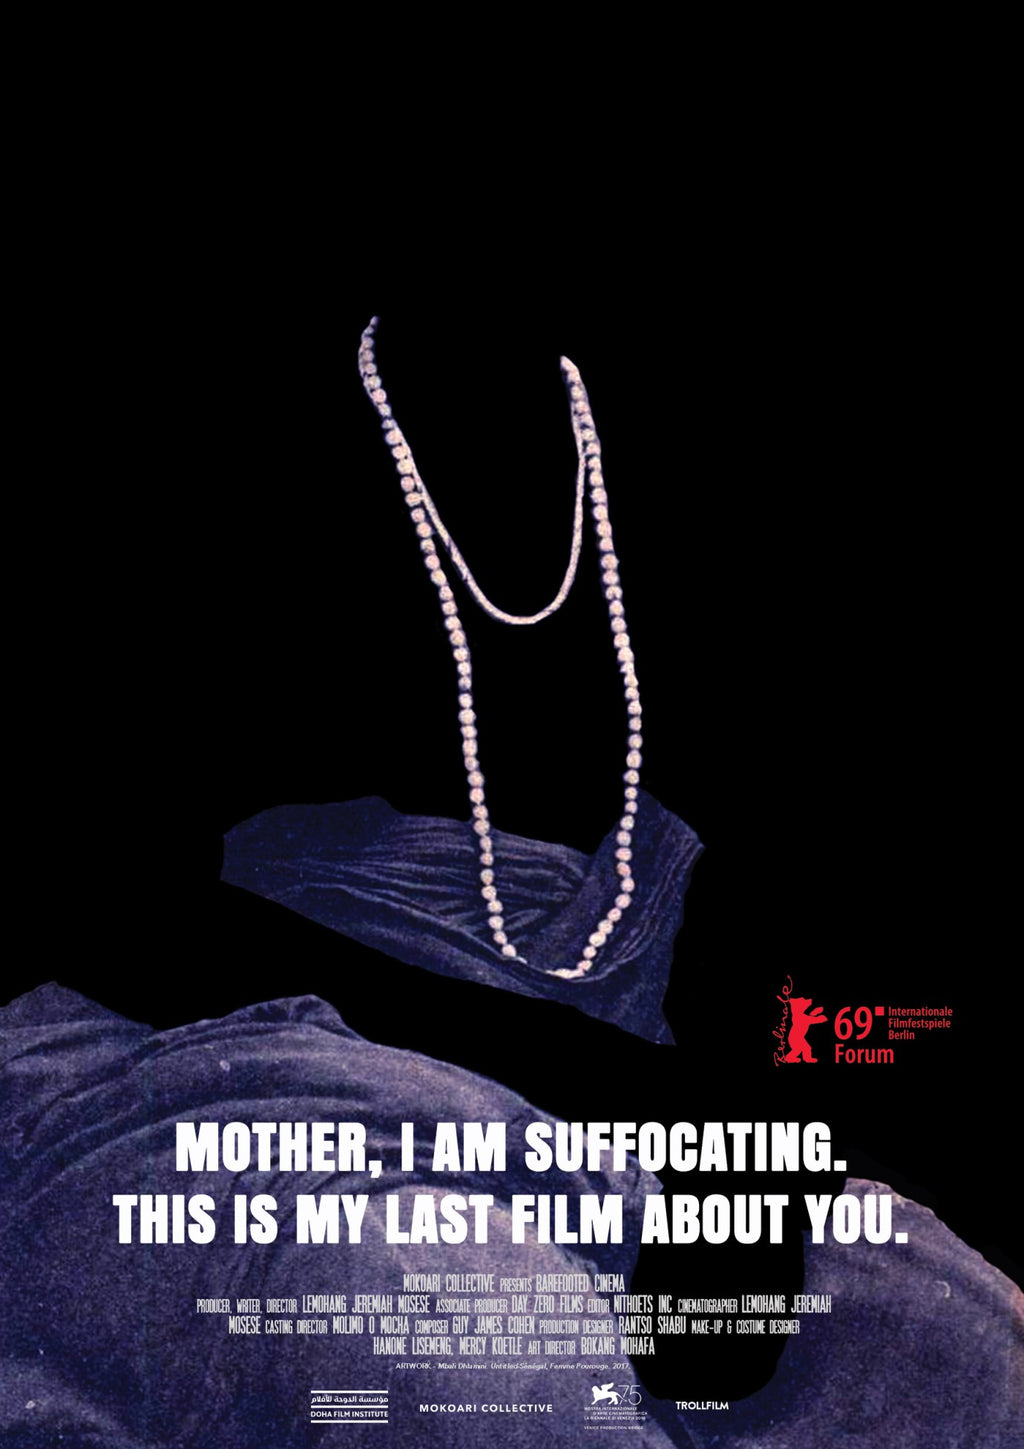 Mother, I am Suffocating. This is my Last Film About You